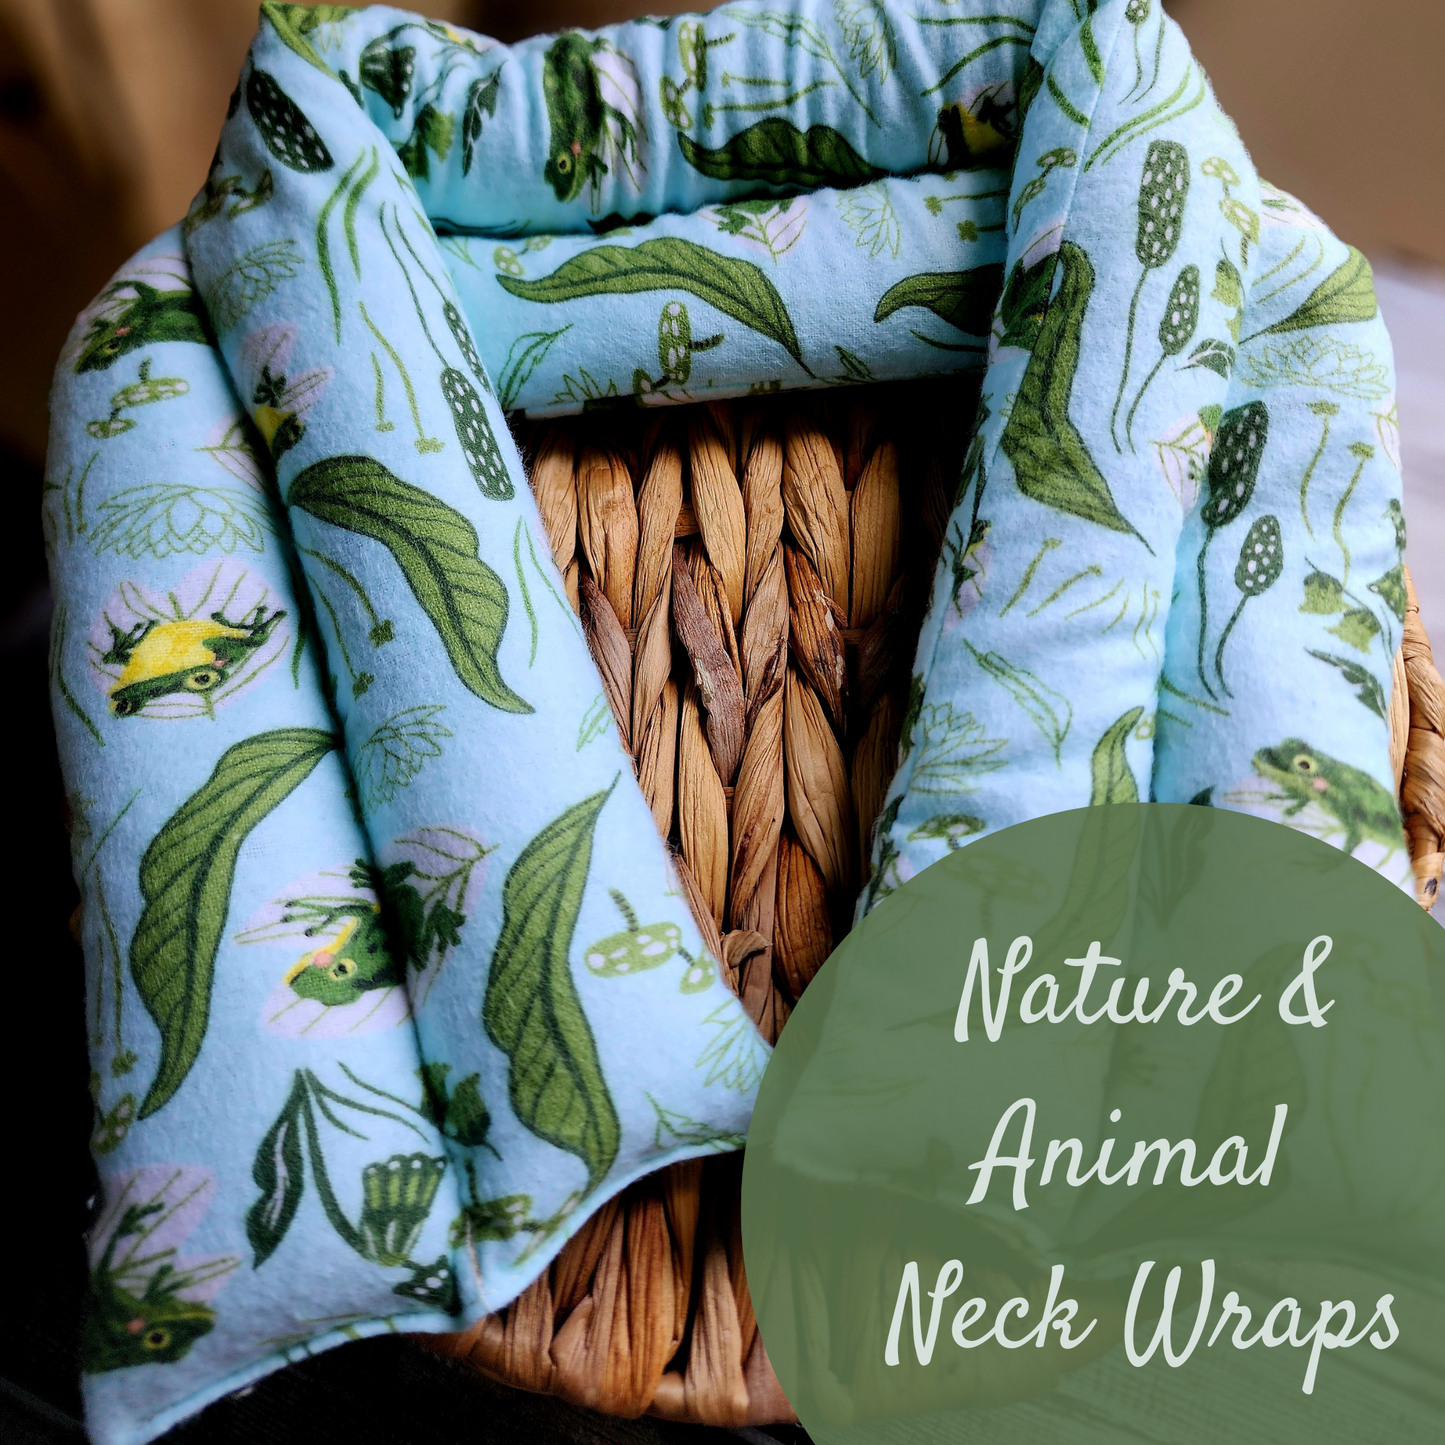 Aromatherapy Hot/Cold Weighted Neck Wraps - Super Snuggle Animal / Floral Flannel